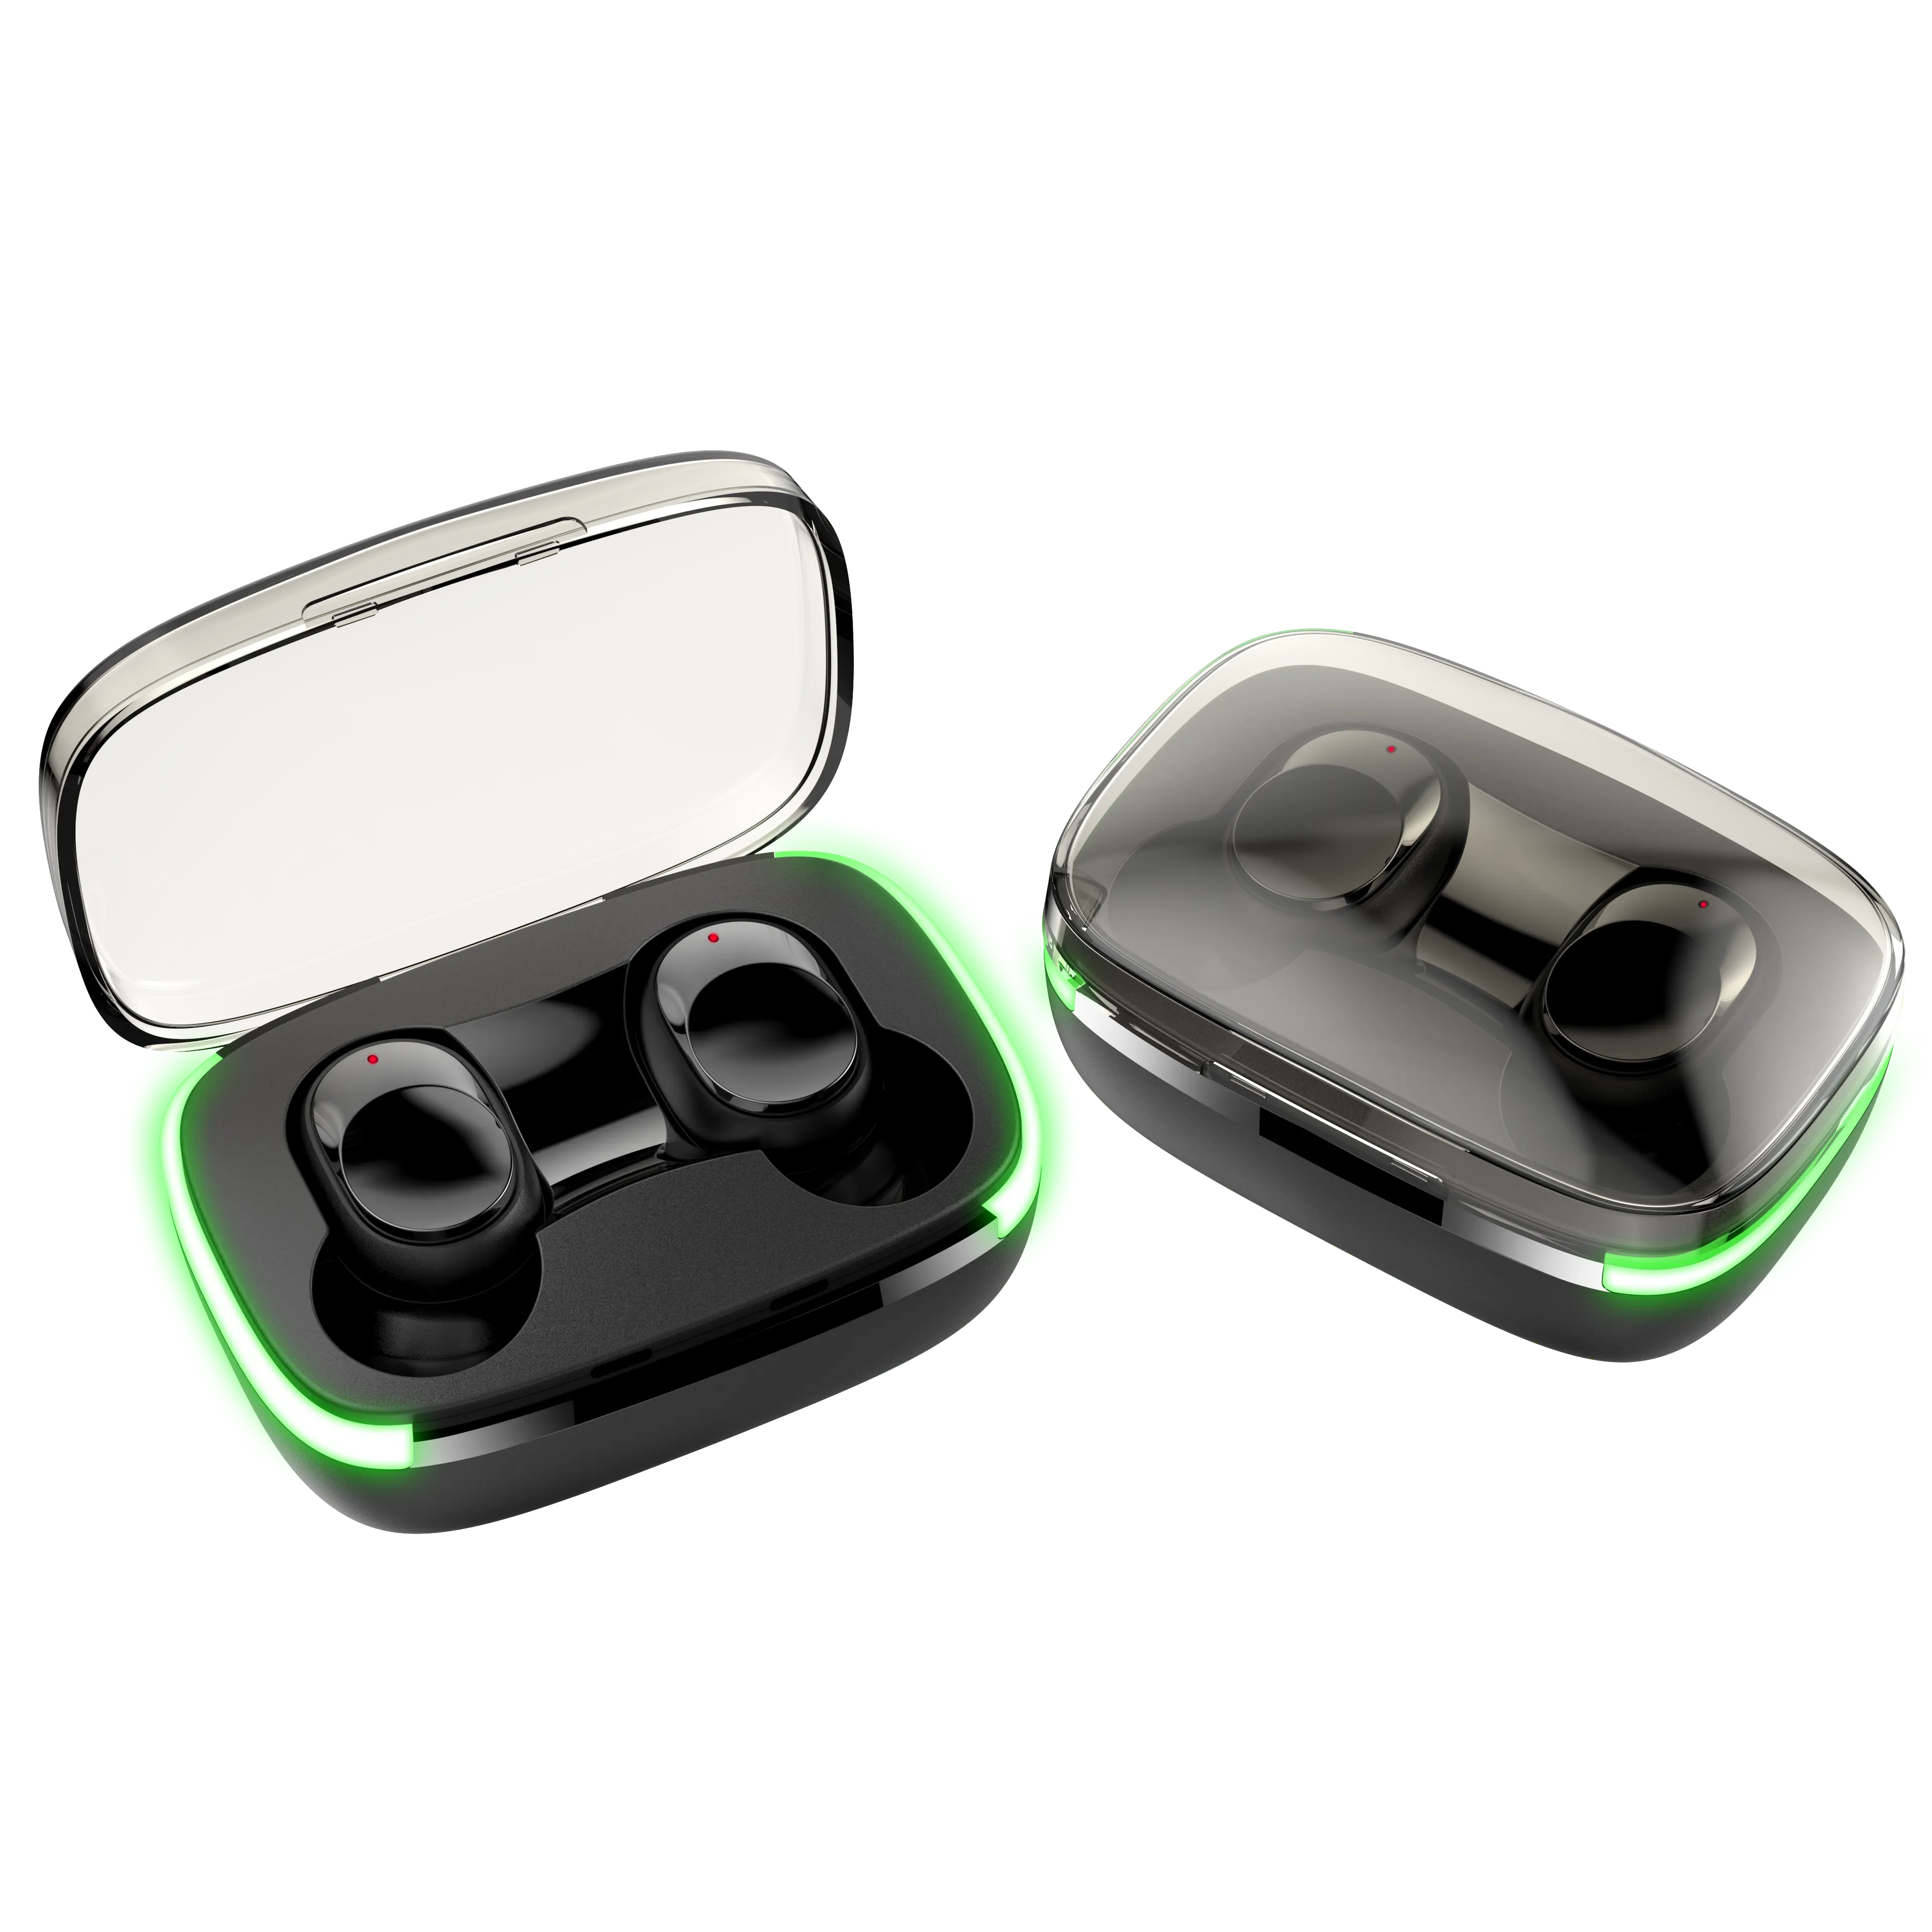 F2 Smart connected jewelry Tws Headphones Touch Control Include A Portable Charging Case with Play music